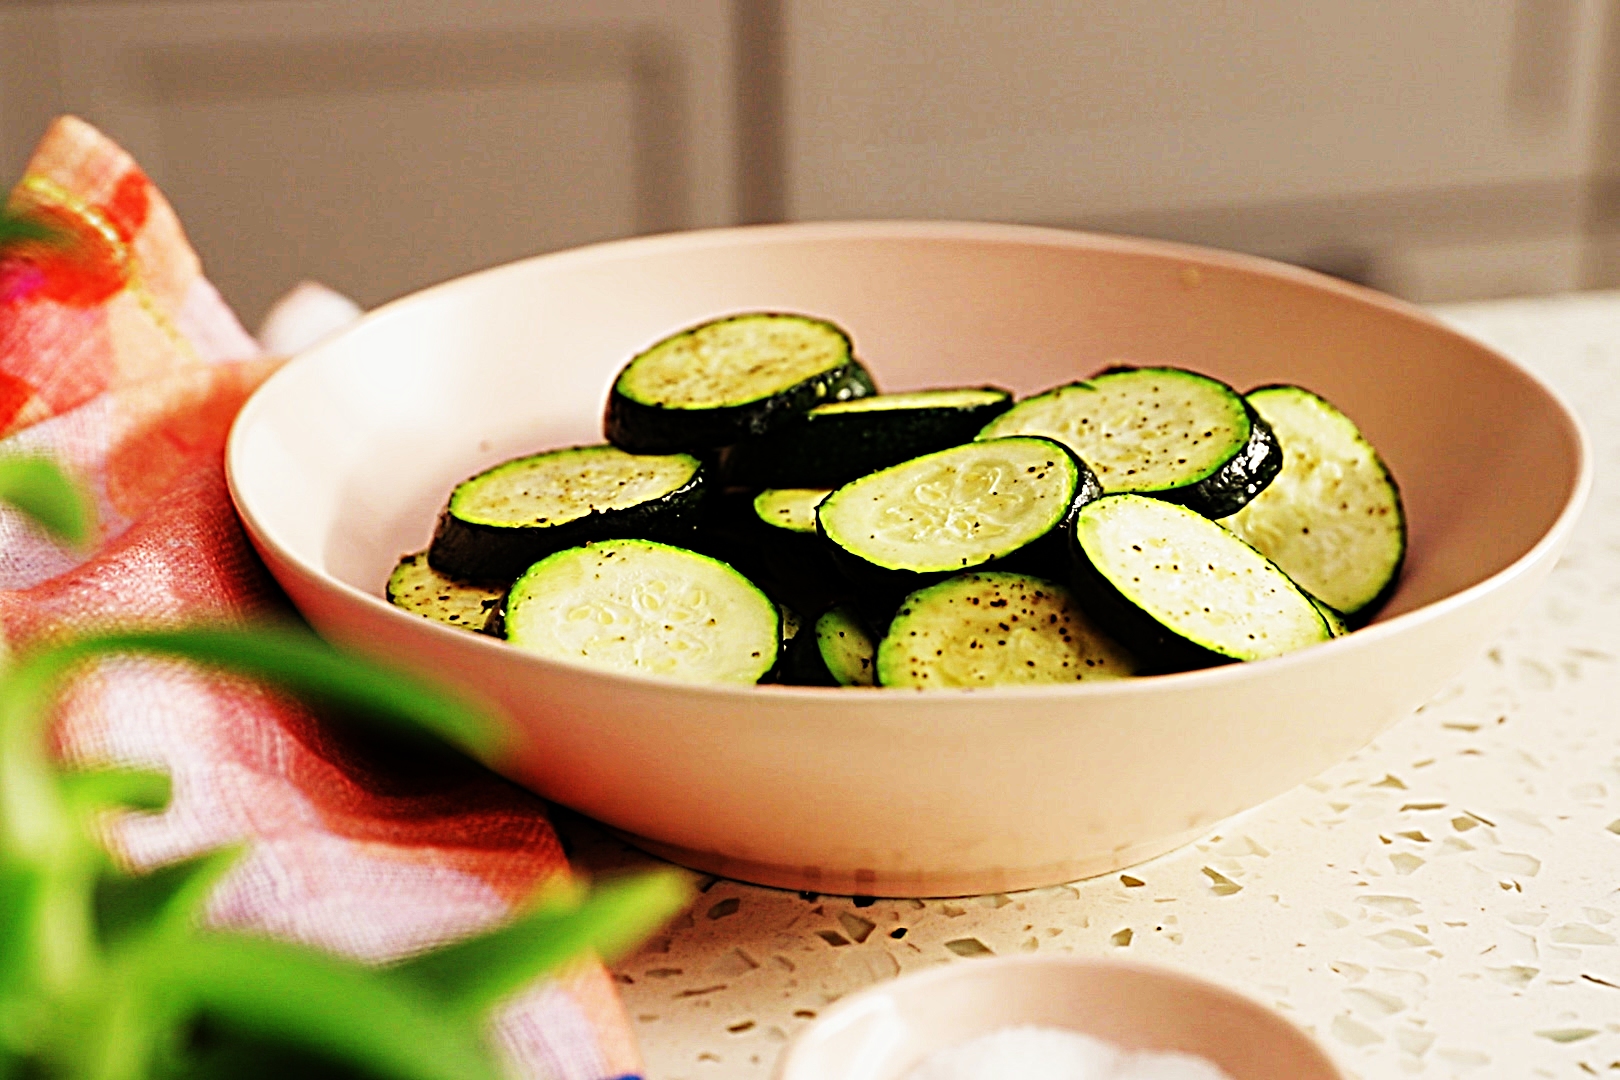 Stupid-Easy Recipe for Fat-Free Baked Zucchini (#1 Top-Rated)